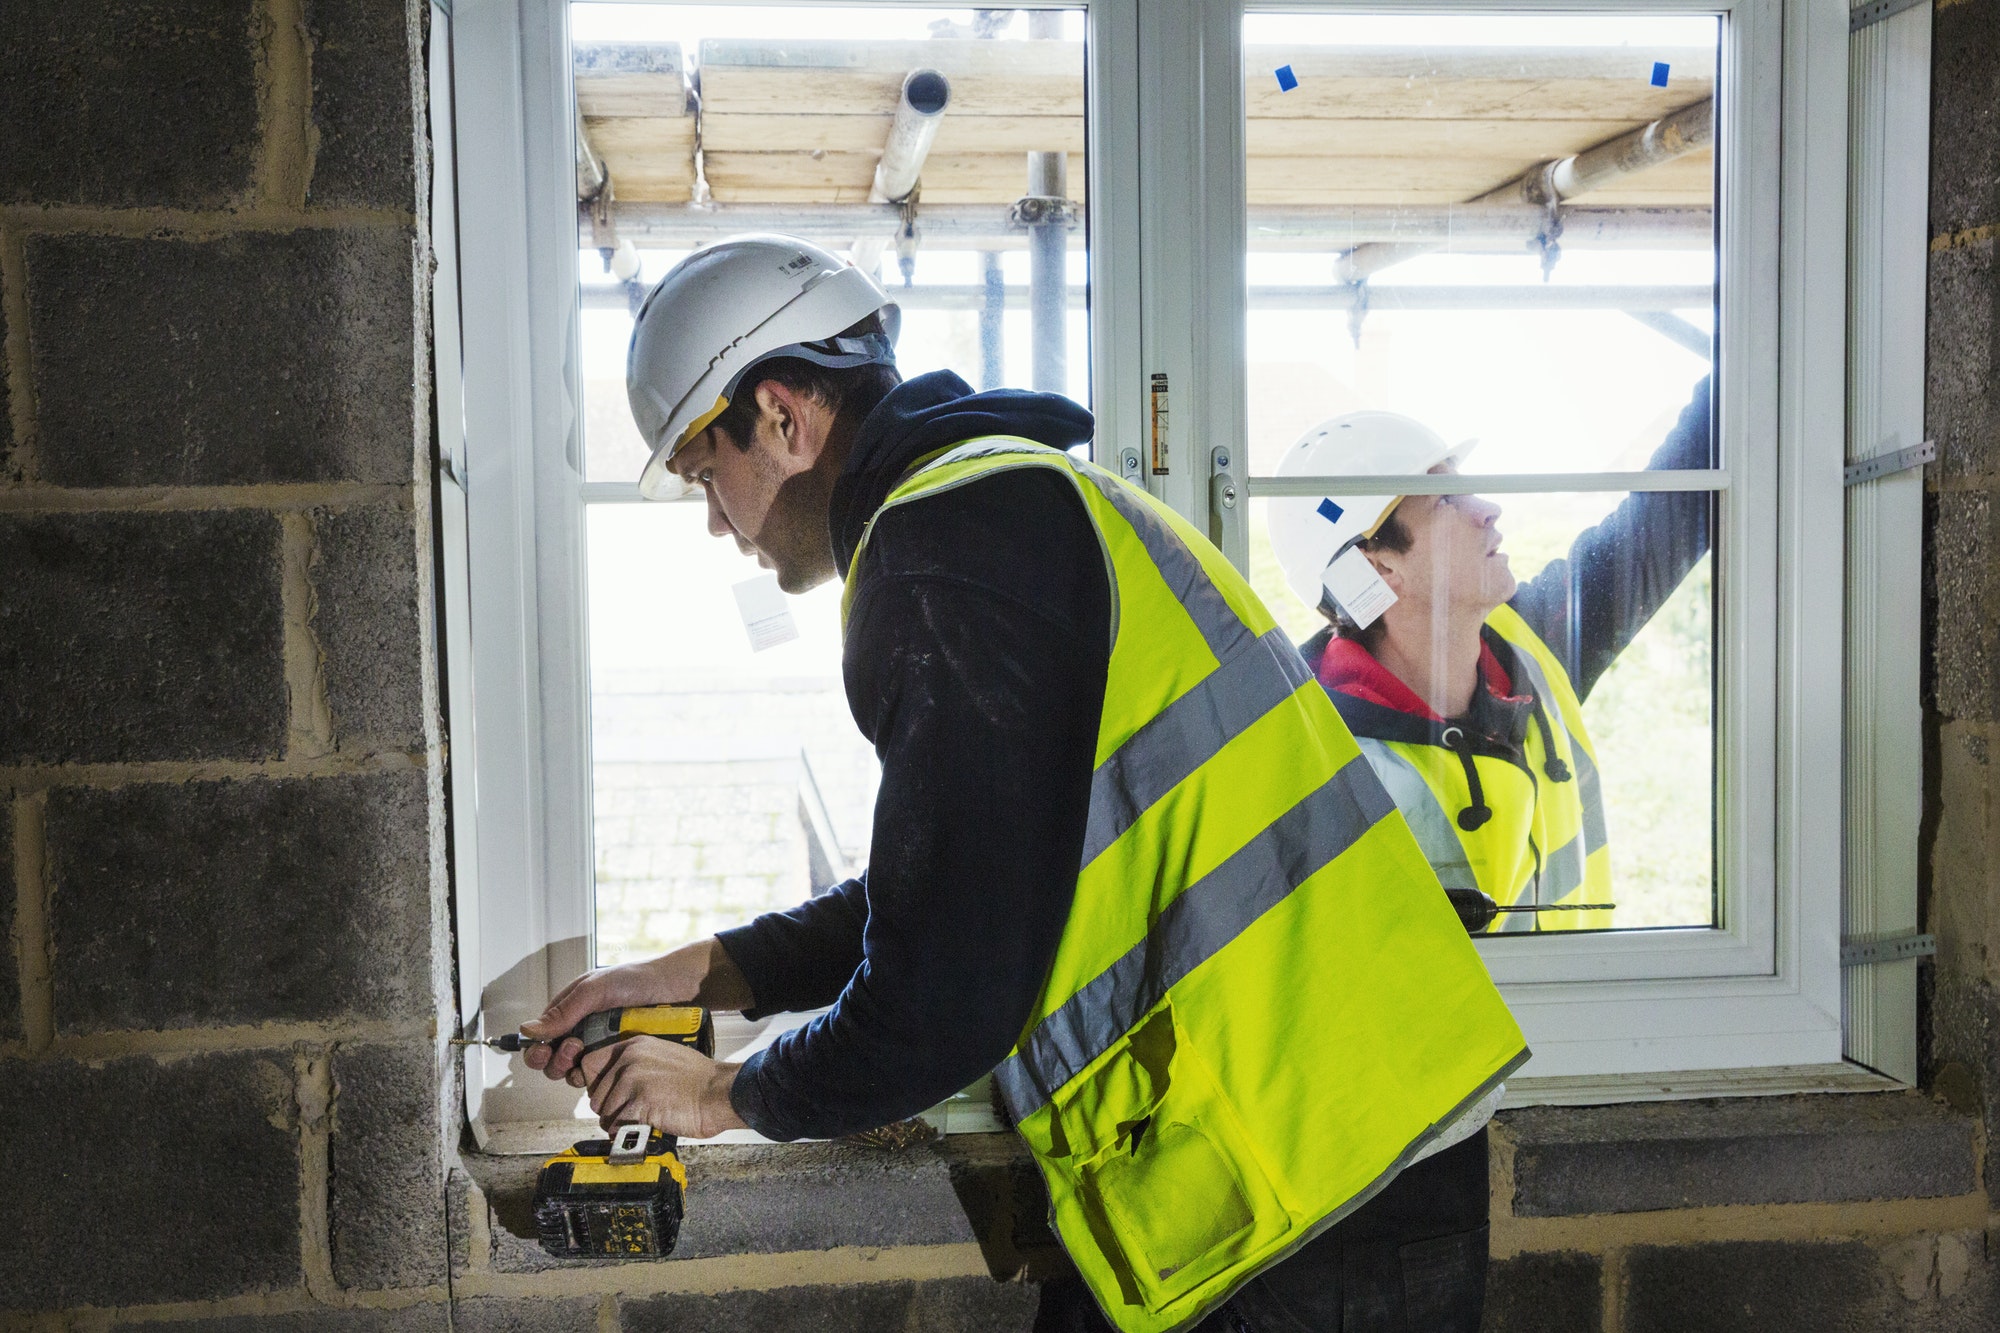 A workman on a construction site, builder in hard hat using an electric drill on a window sill.